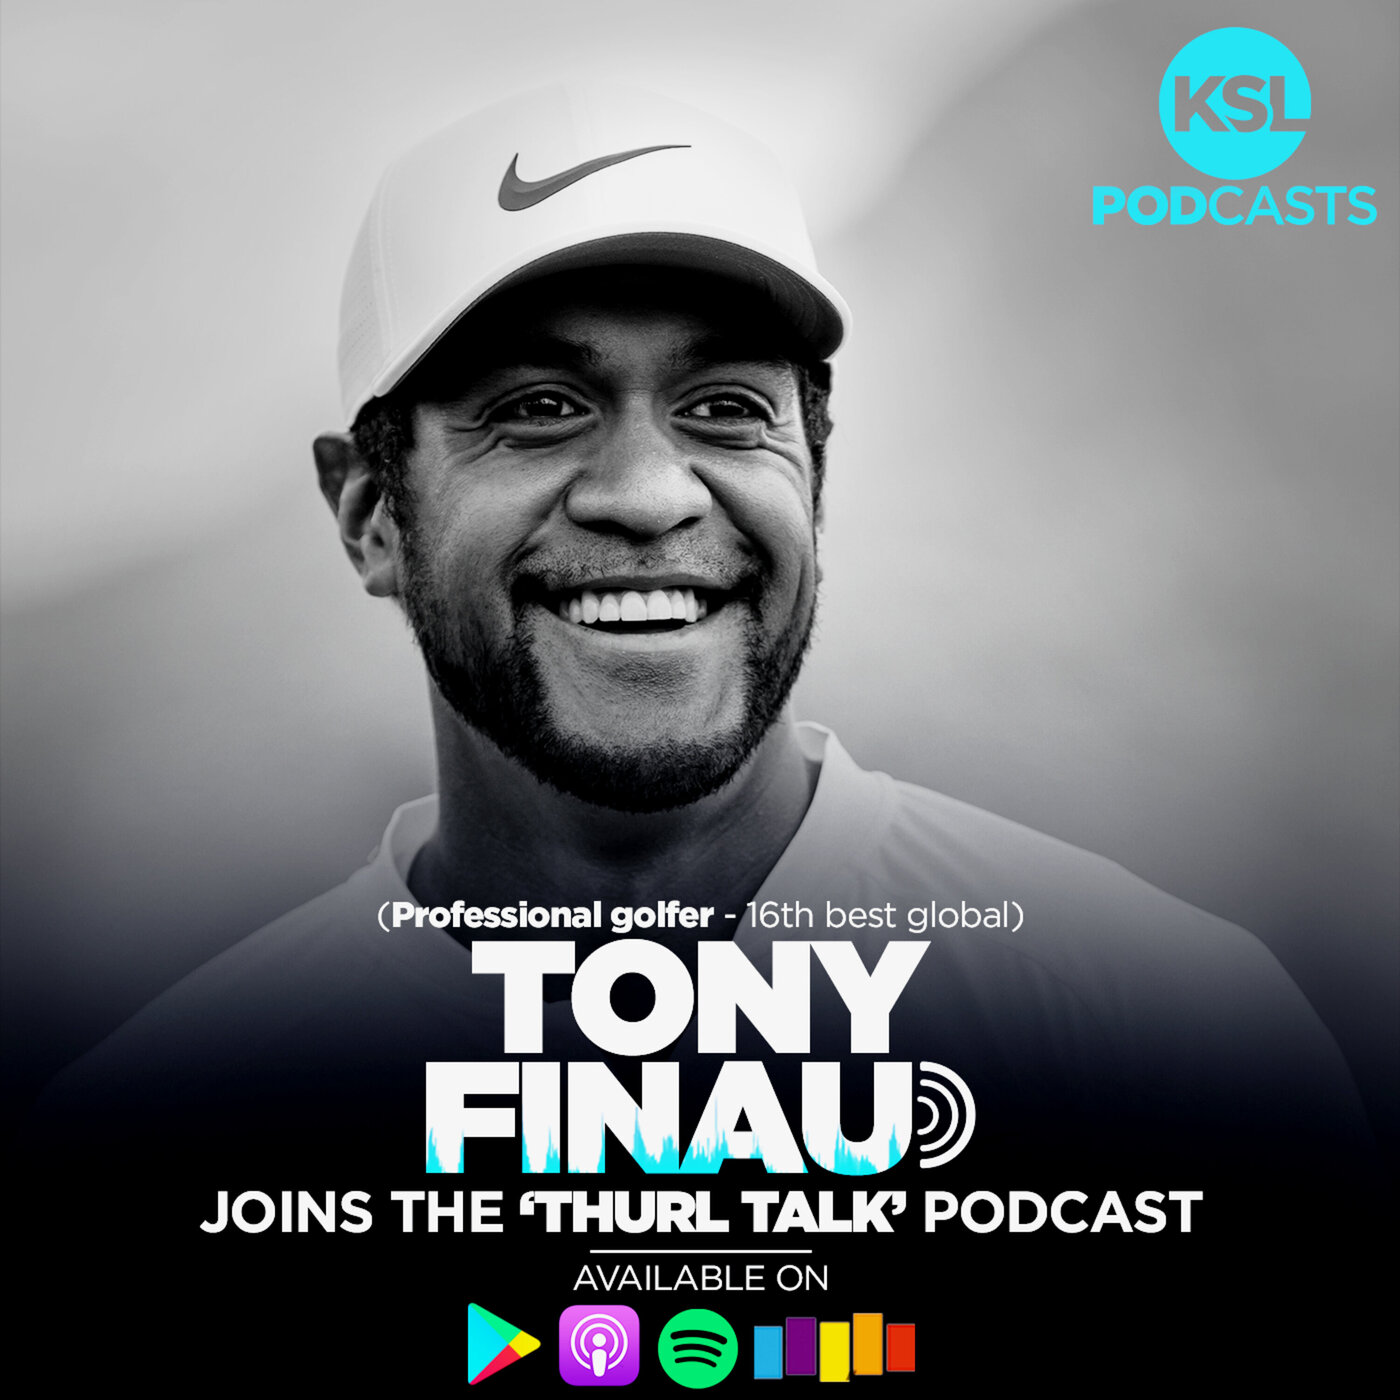 Tony Finau on COVID-19, the challenges he faced growing up, his goals, and his pride of being a father and husband